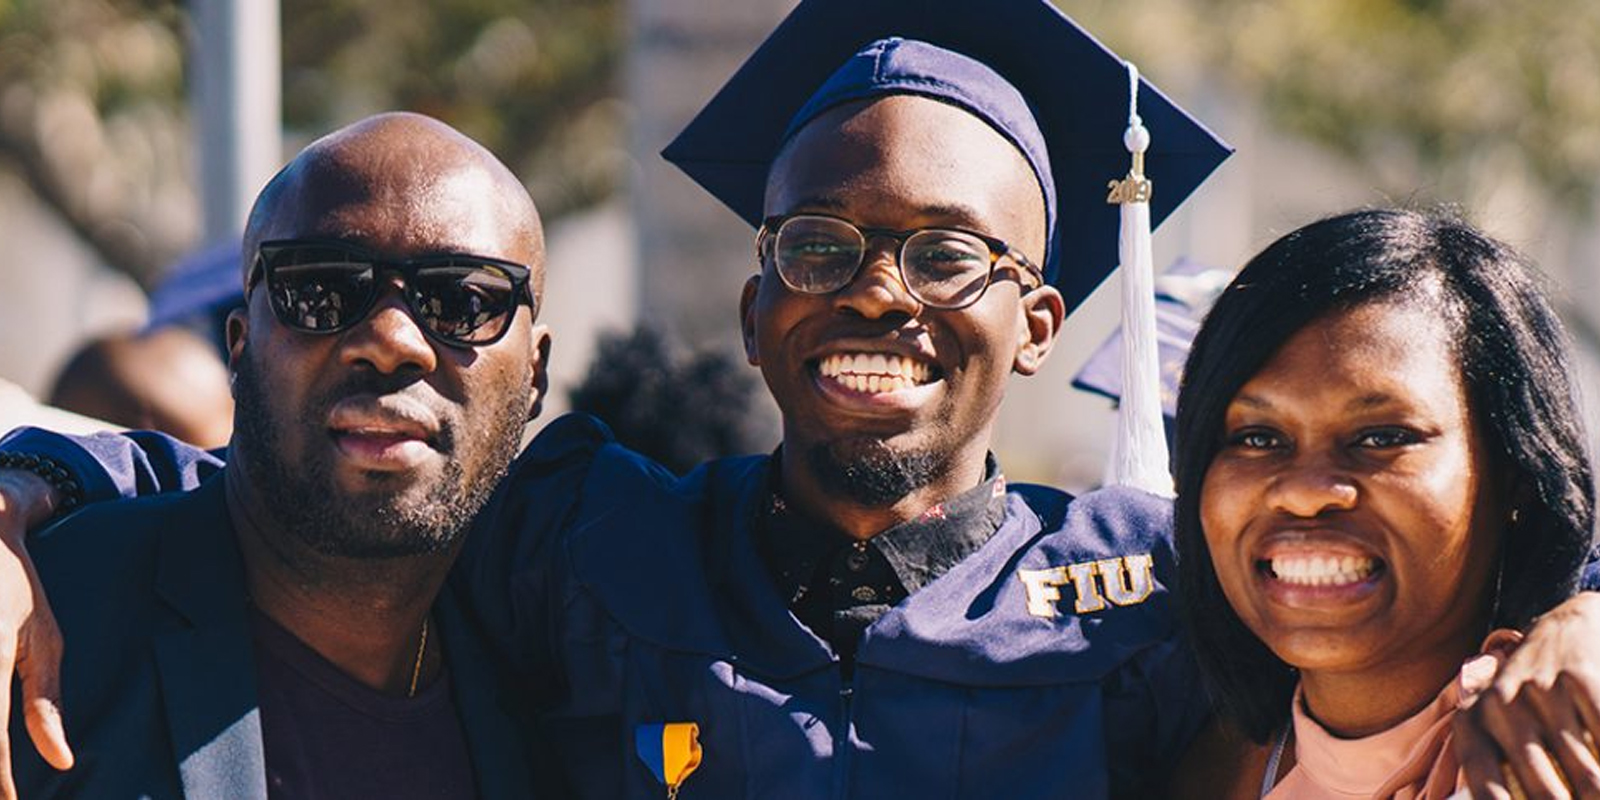 A student who graduated from FIU in his cap and gown posing for pictures with family. 